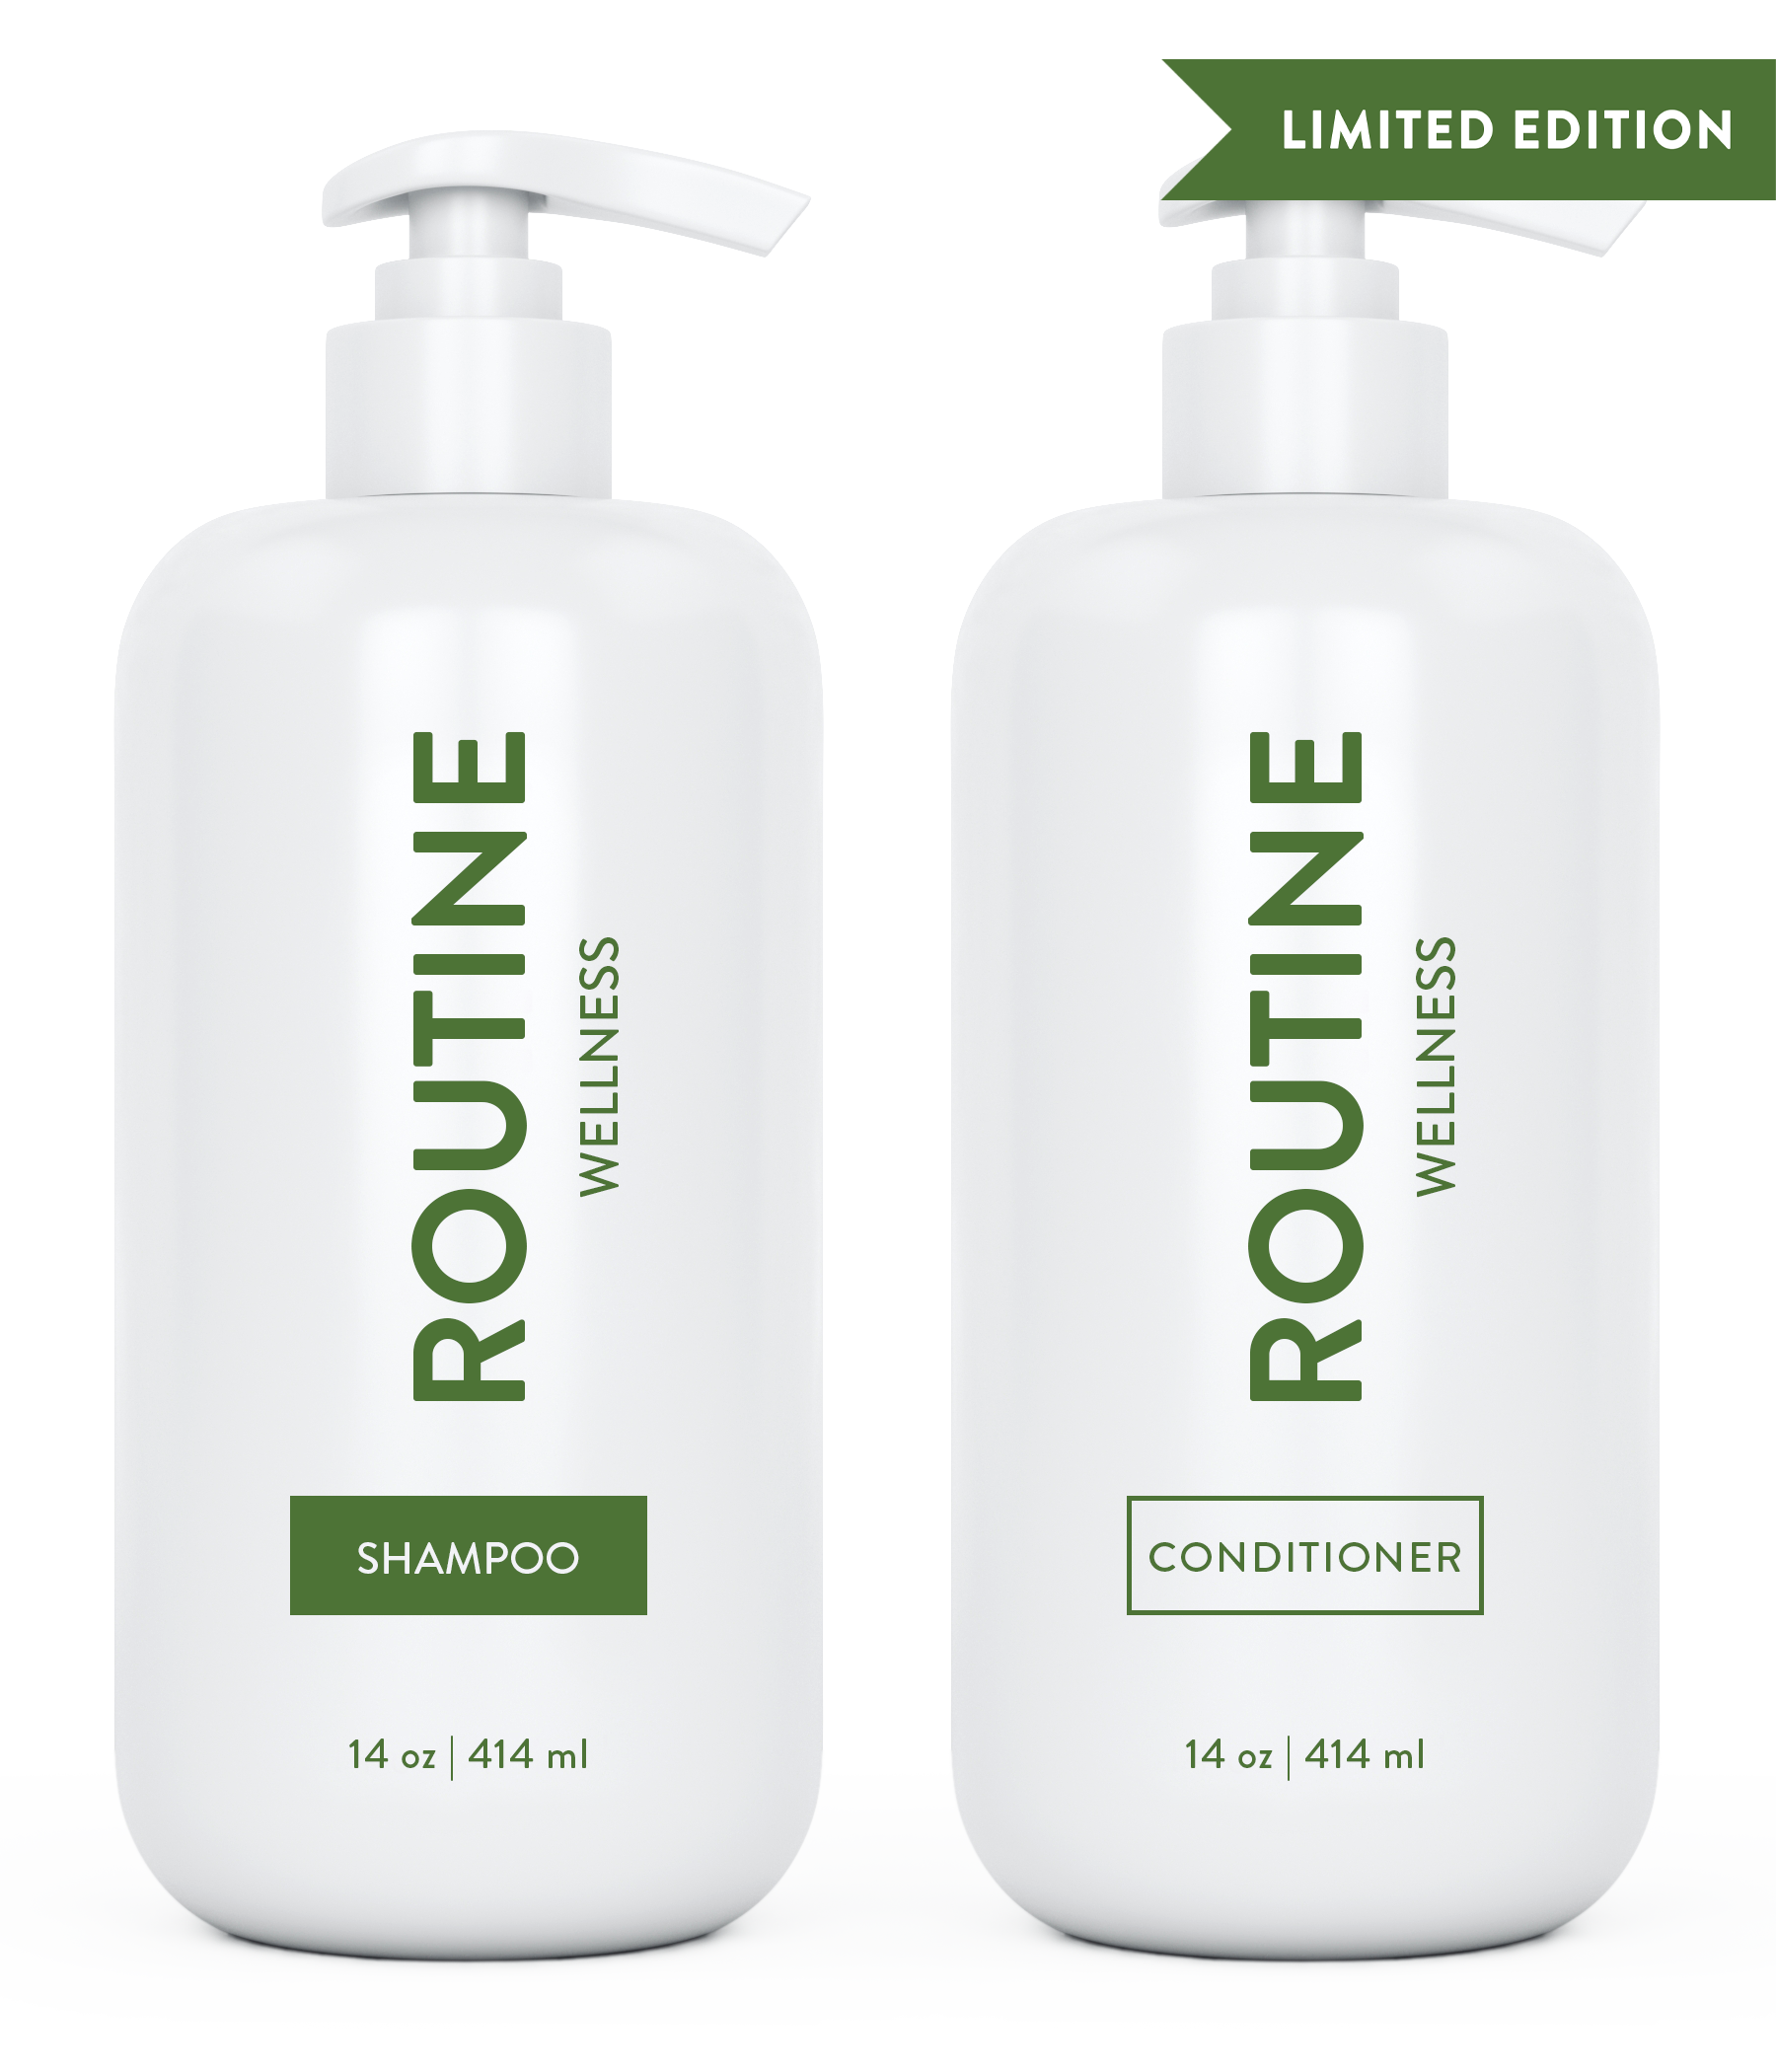 Routine Wellness Shampoo and Conditioner are scientifically formulated to end bad hair days by strengthening hair and reducing breakage